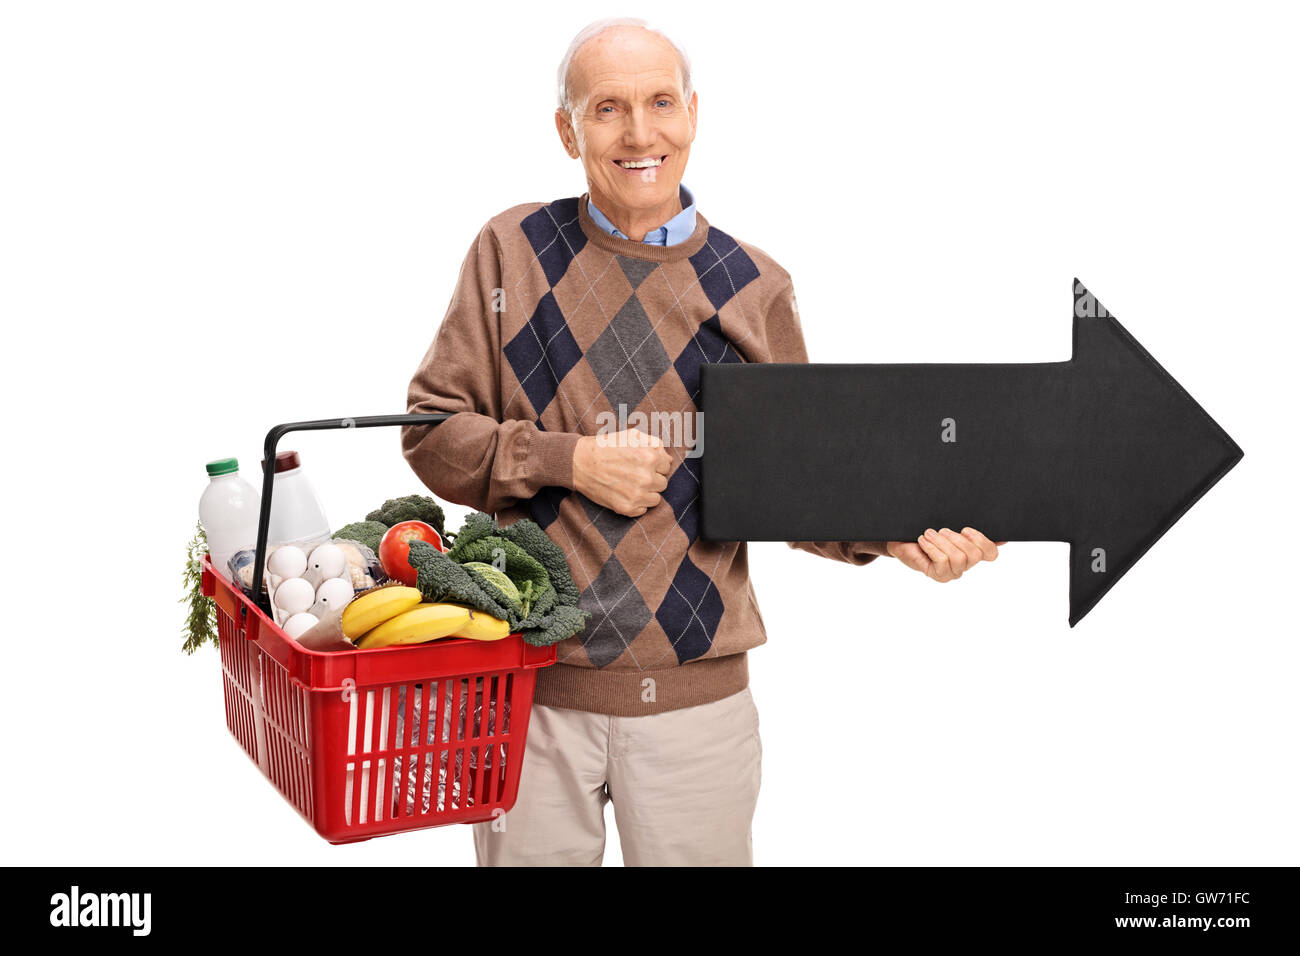 Elderly man holding a shopping basket and an arrow pointing right isolated on white background Stock Photo